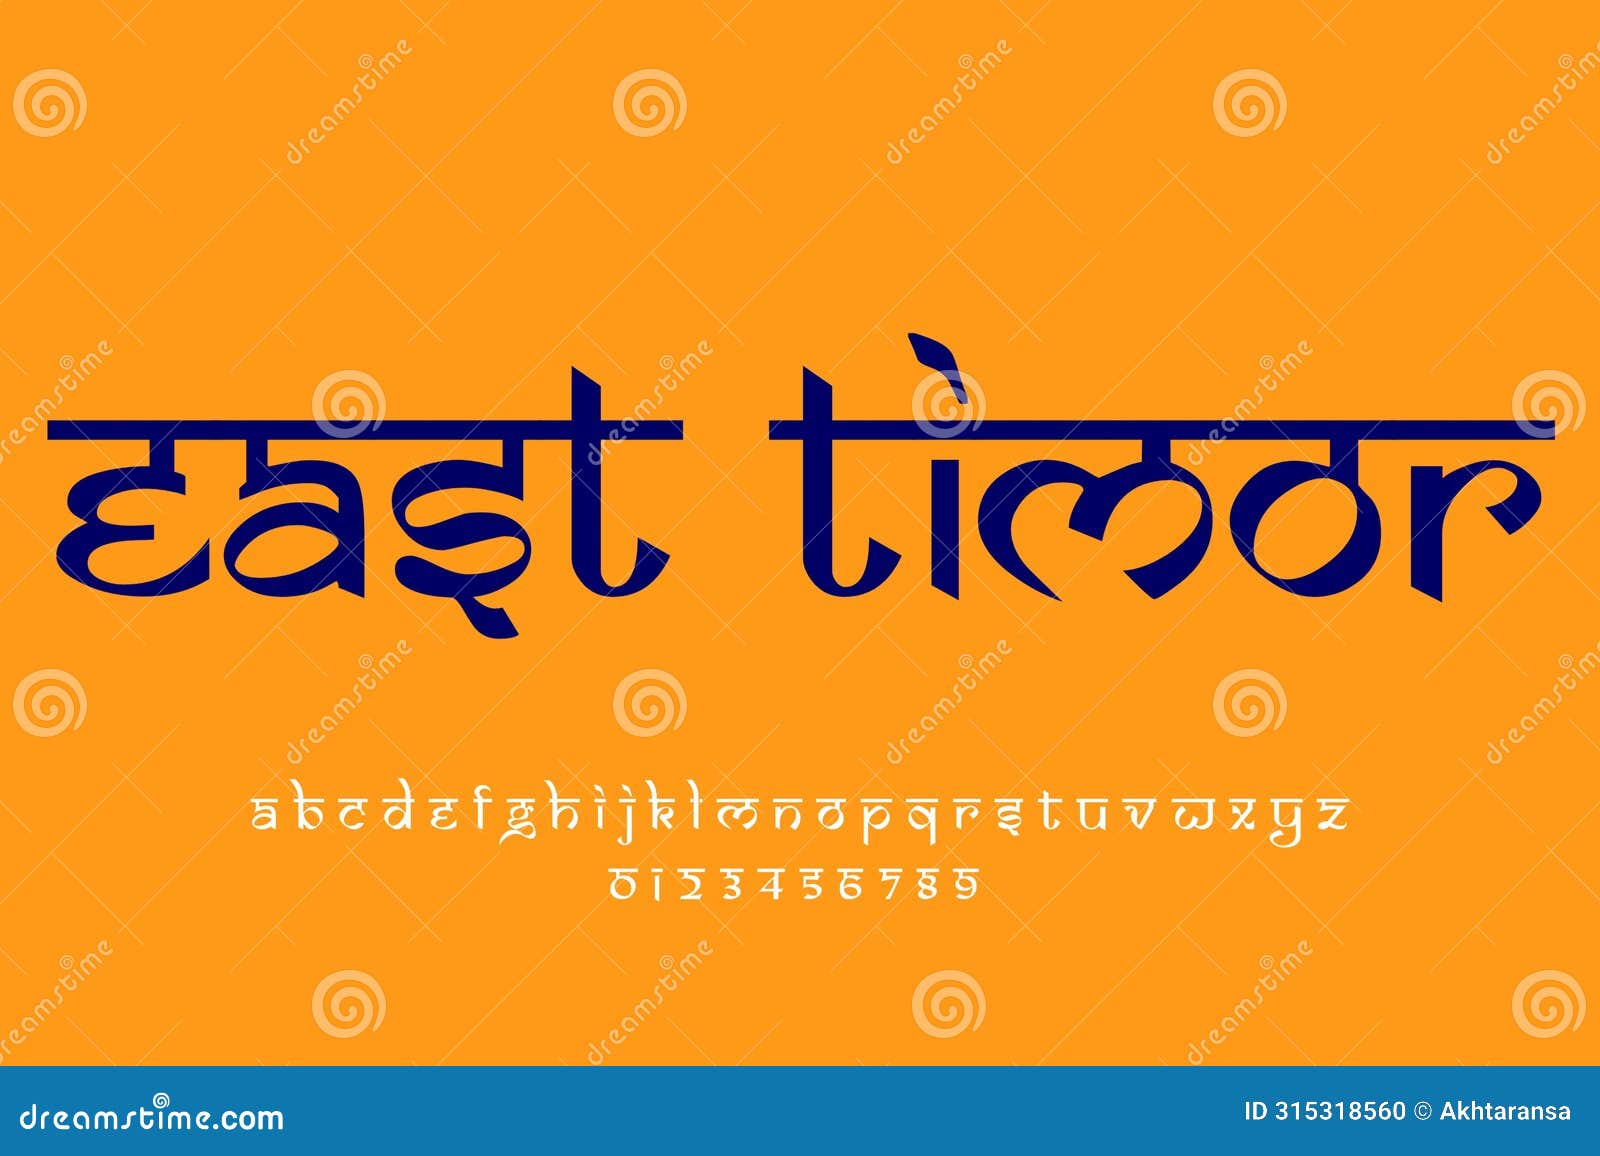 country east timor or timor leste name text . indian style latin font , devanagari inspired alphabet, letters and